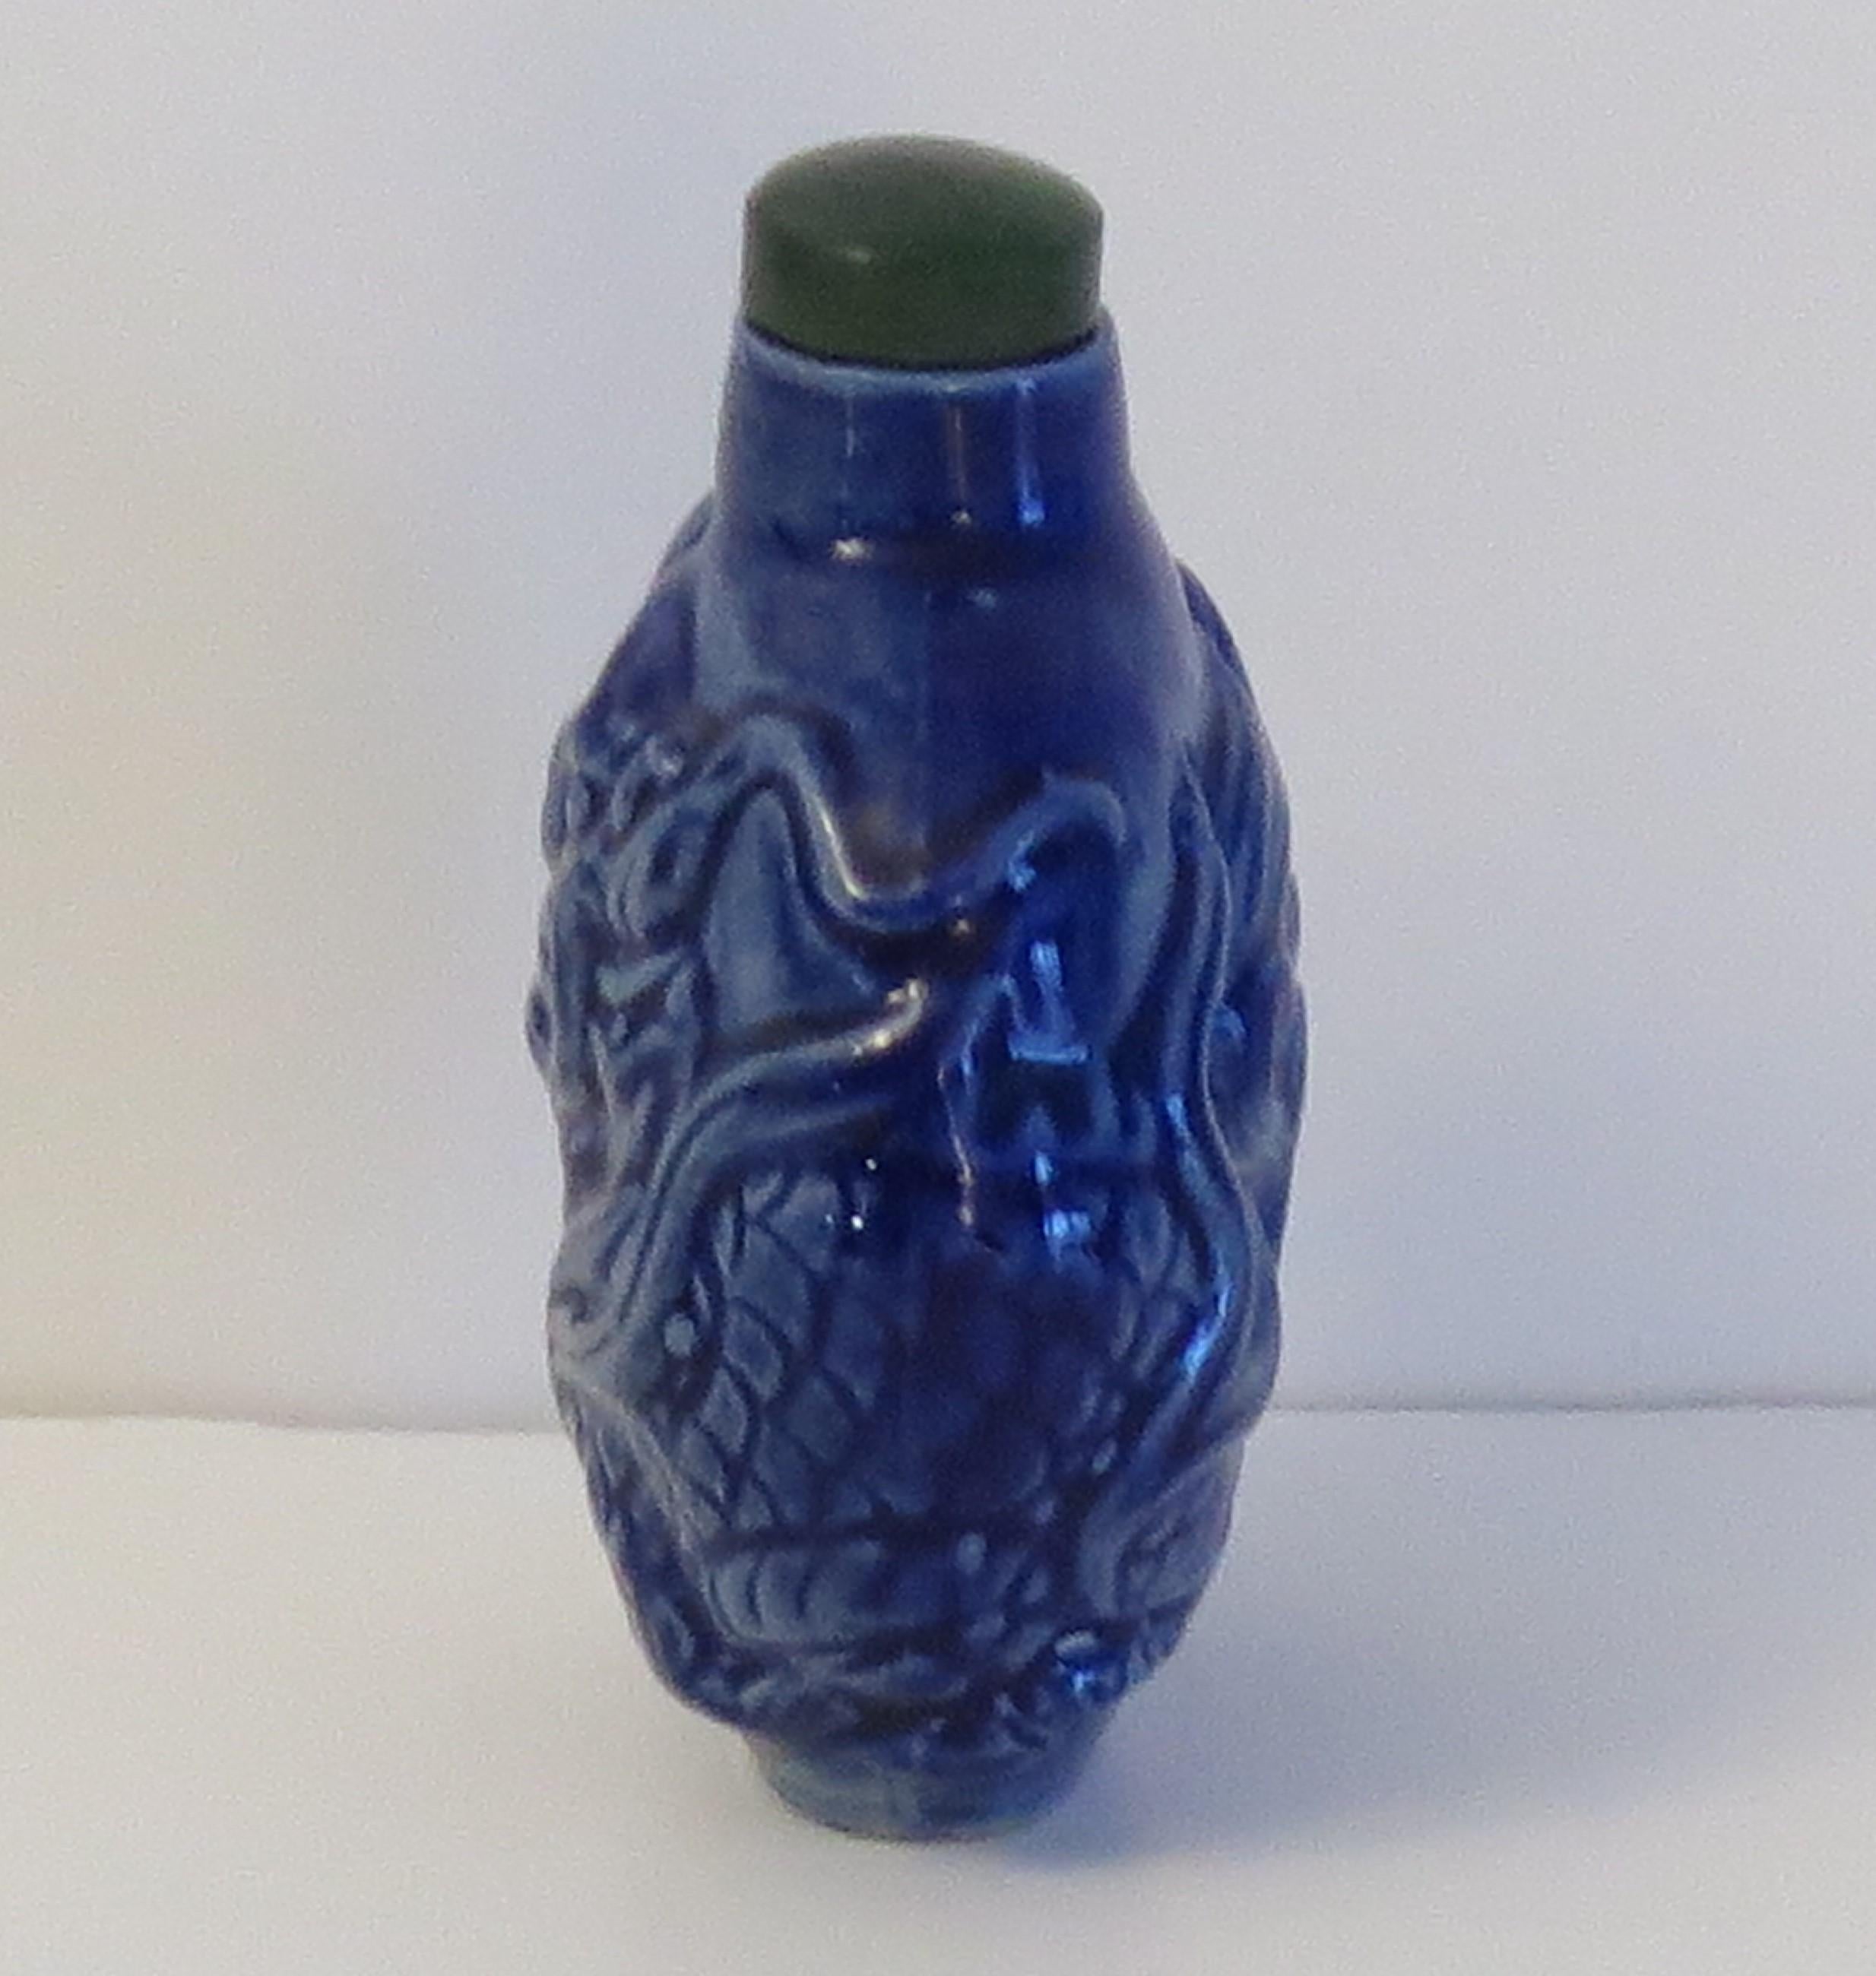 20th Century Chinese Porcelain Snuff Bottle moulded dragon stone top with spoon, Circa 1930s